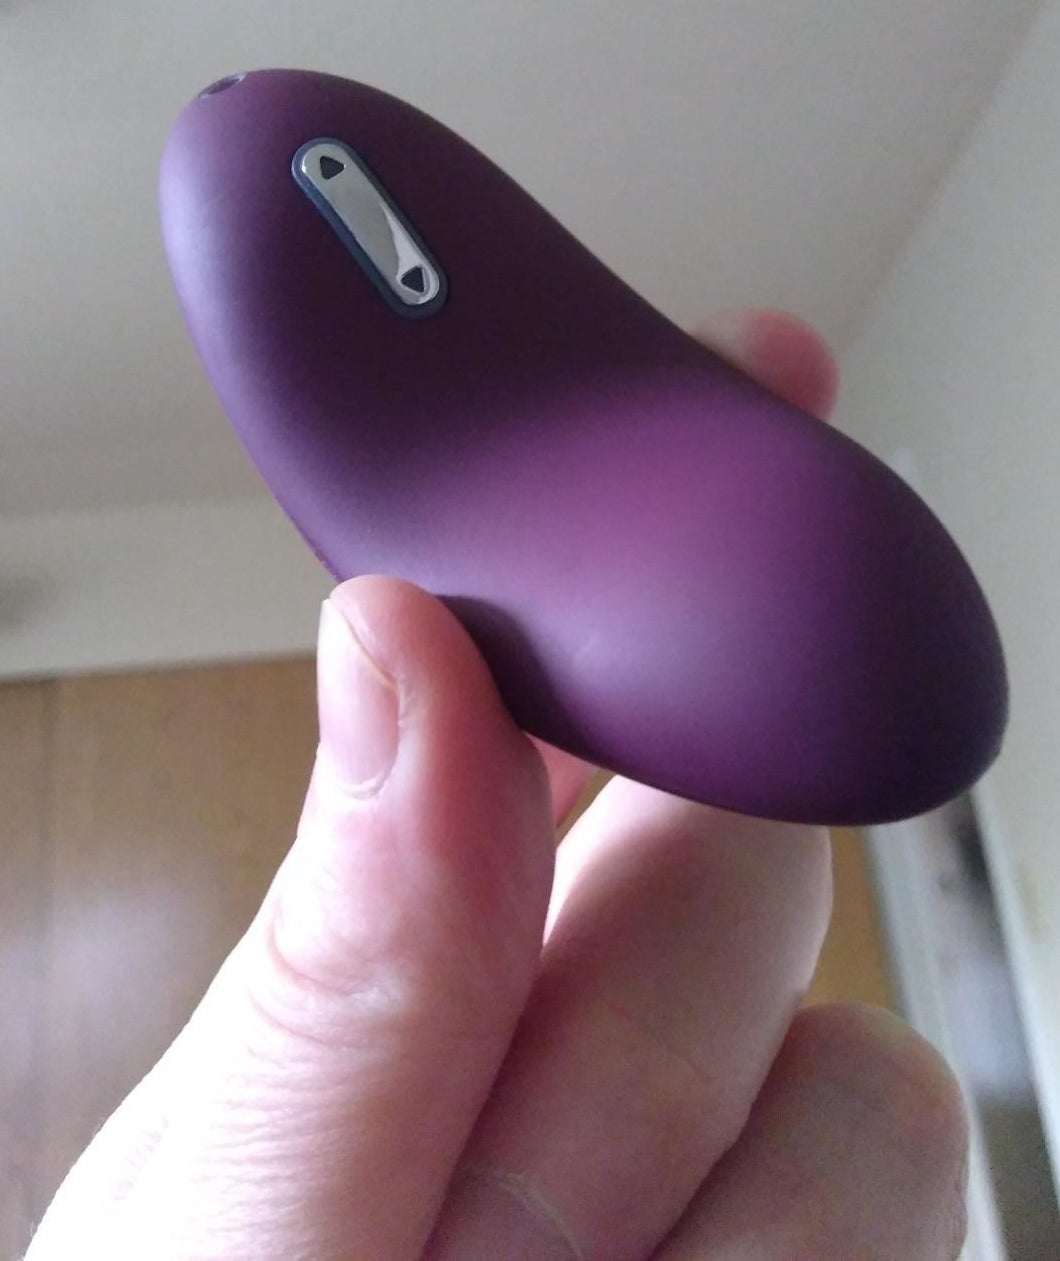 A reviewer photo of a hand holding the compact, purple Echo clitoral vibrator